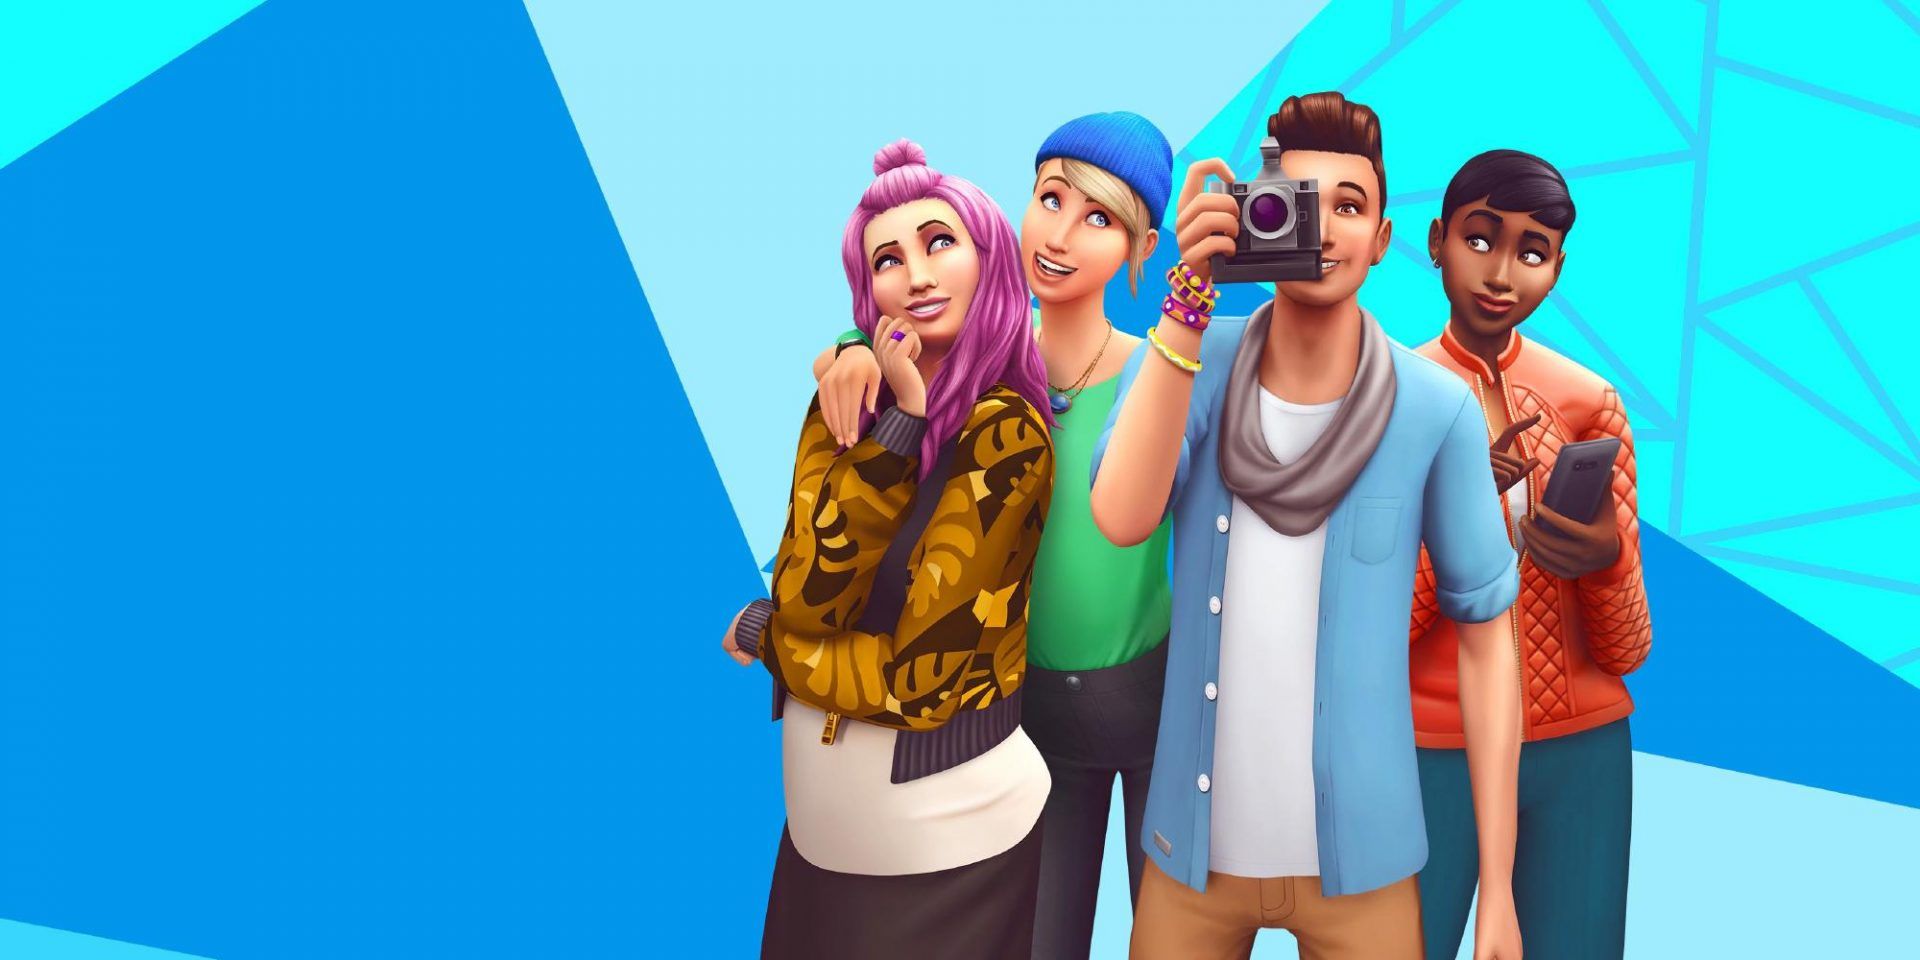 all sims 4 dlc for free